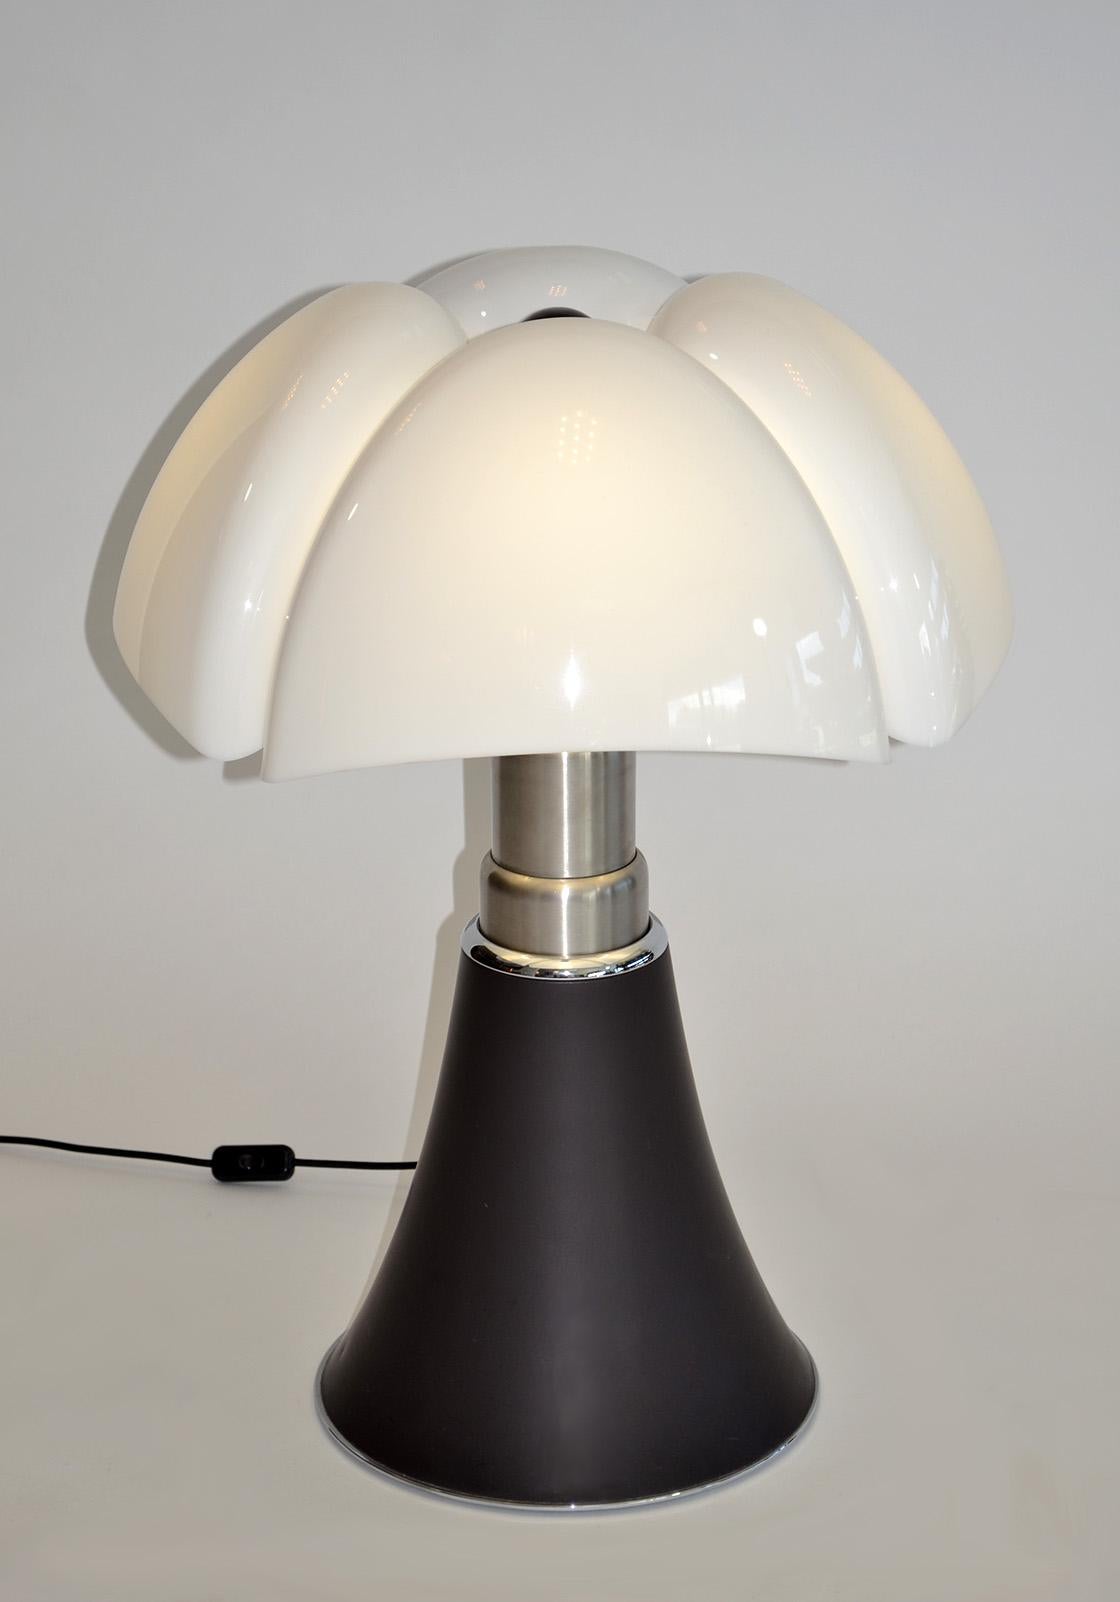 Large Pipistrello table lamp by Gae Aulenti for Martinelli Luce. 1980s production. Originally designed in 1965, lamp features a white opal methacrylate diffuser on black aluminum base with satin aluminum trim. Can be used as a table or standing lamp